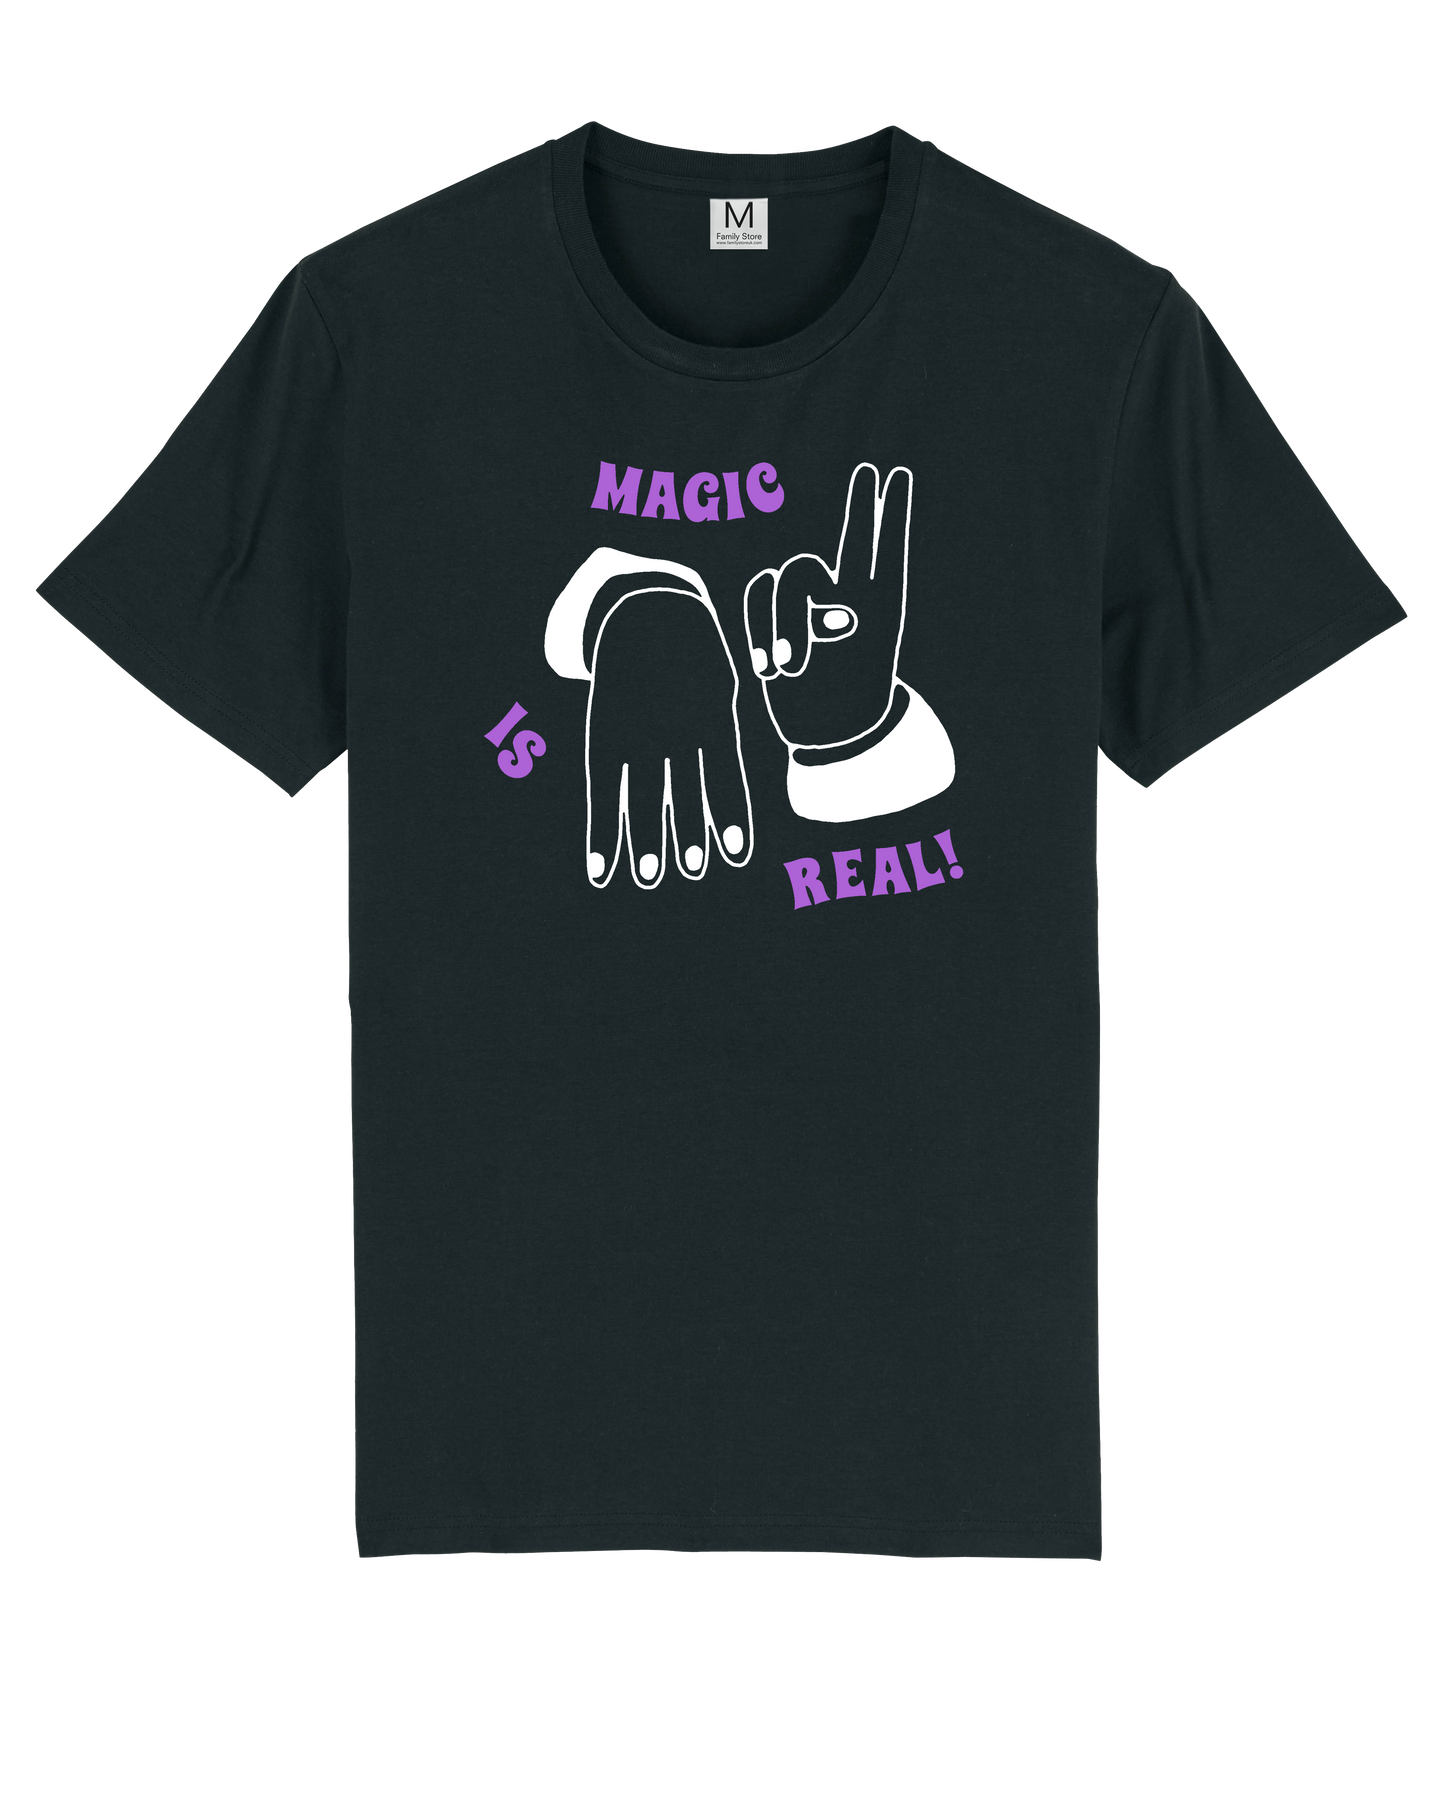 MAGIC IS REAL Black TEE by NICK OHLO x FS